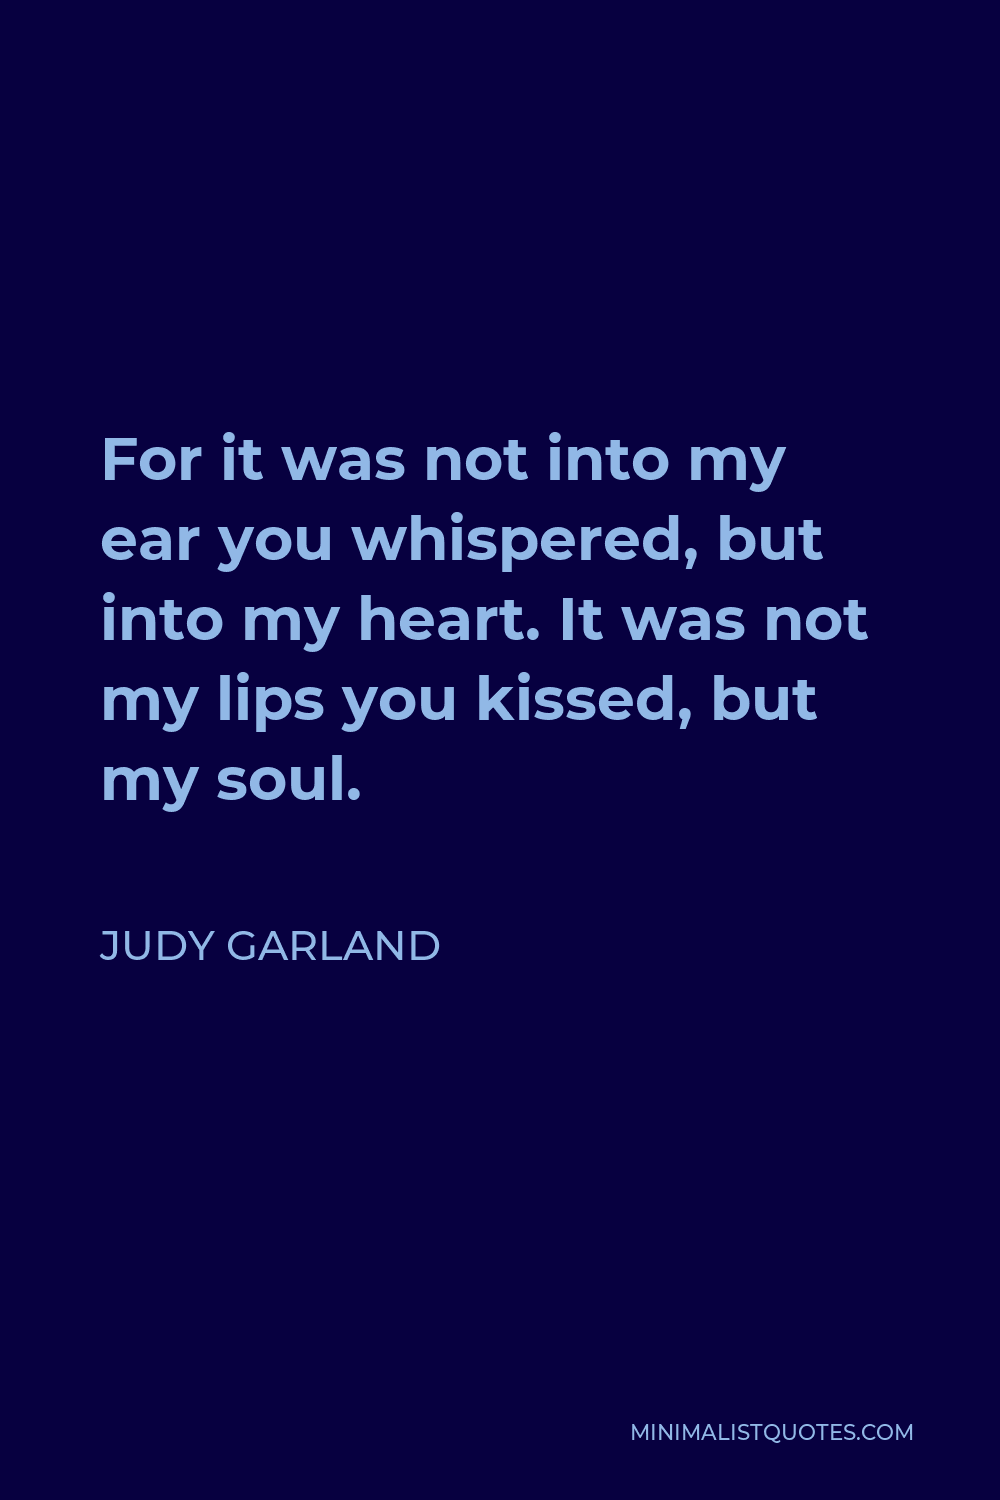 Judy Garland Quote - For it was not into my ear you whispered, but into my heart. It was not my lips you kissed, but my soul.